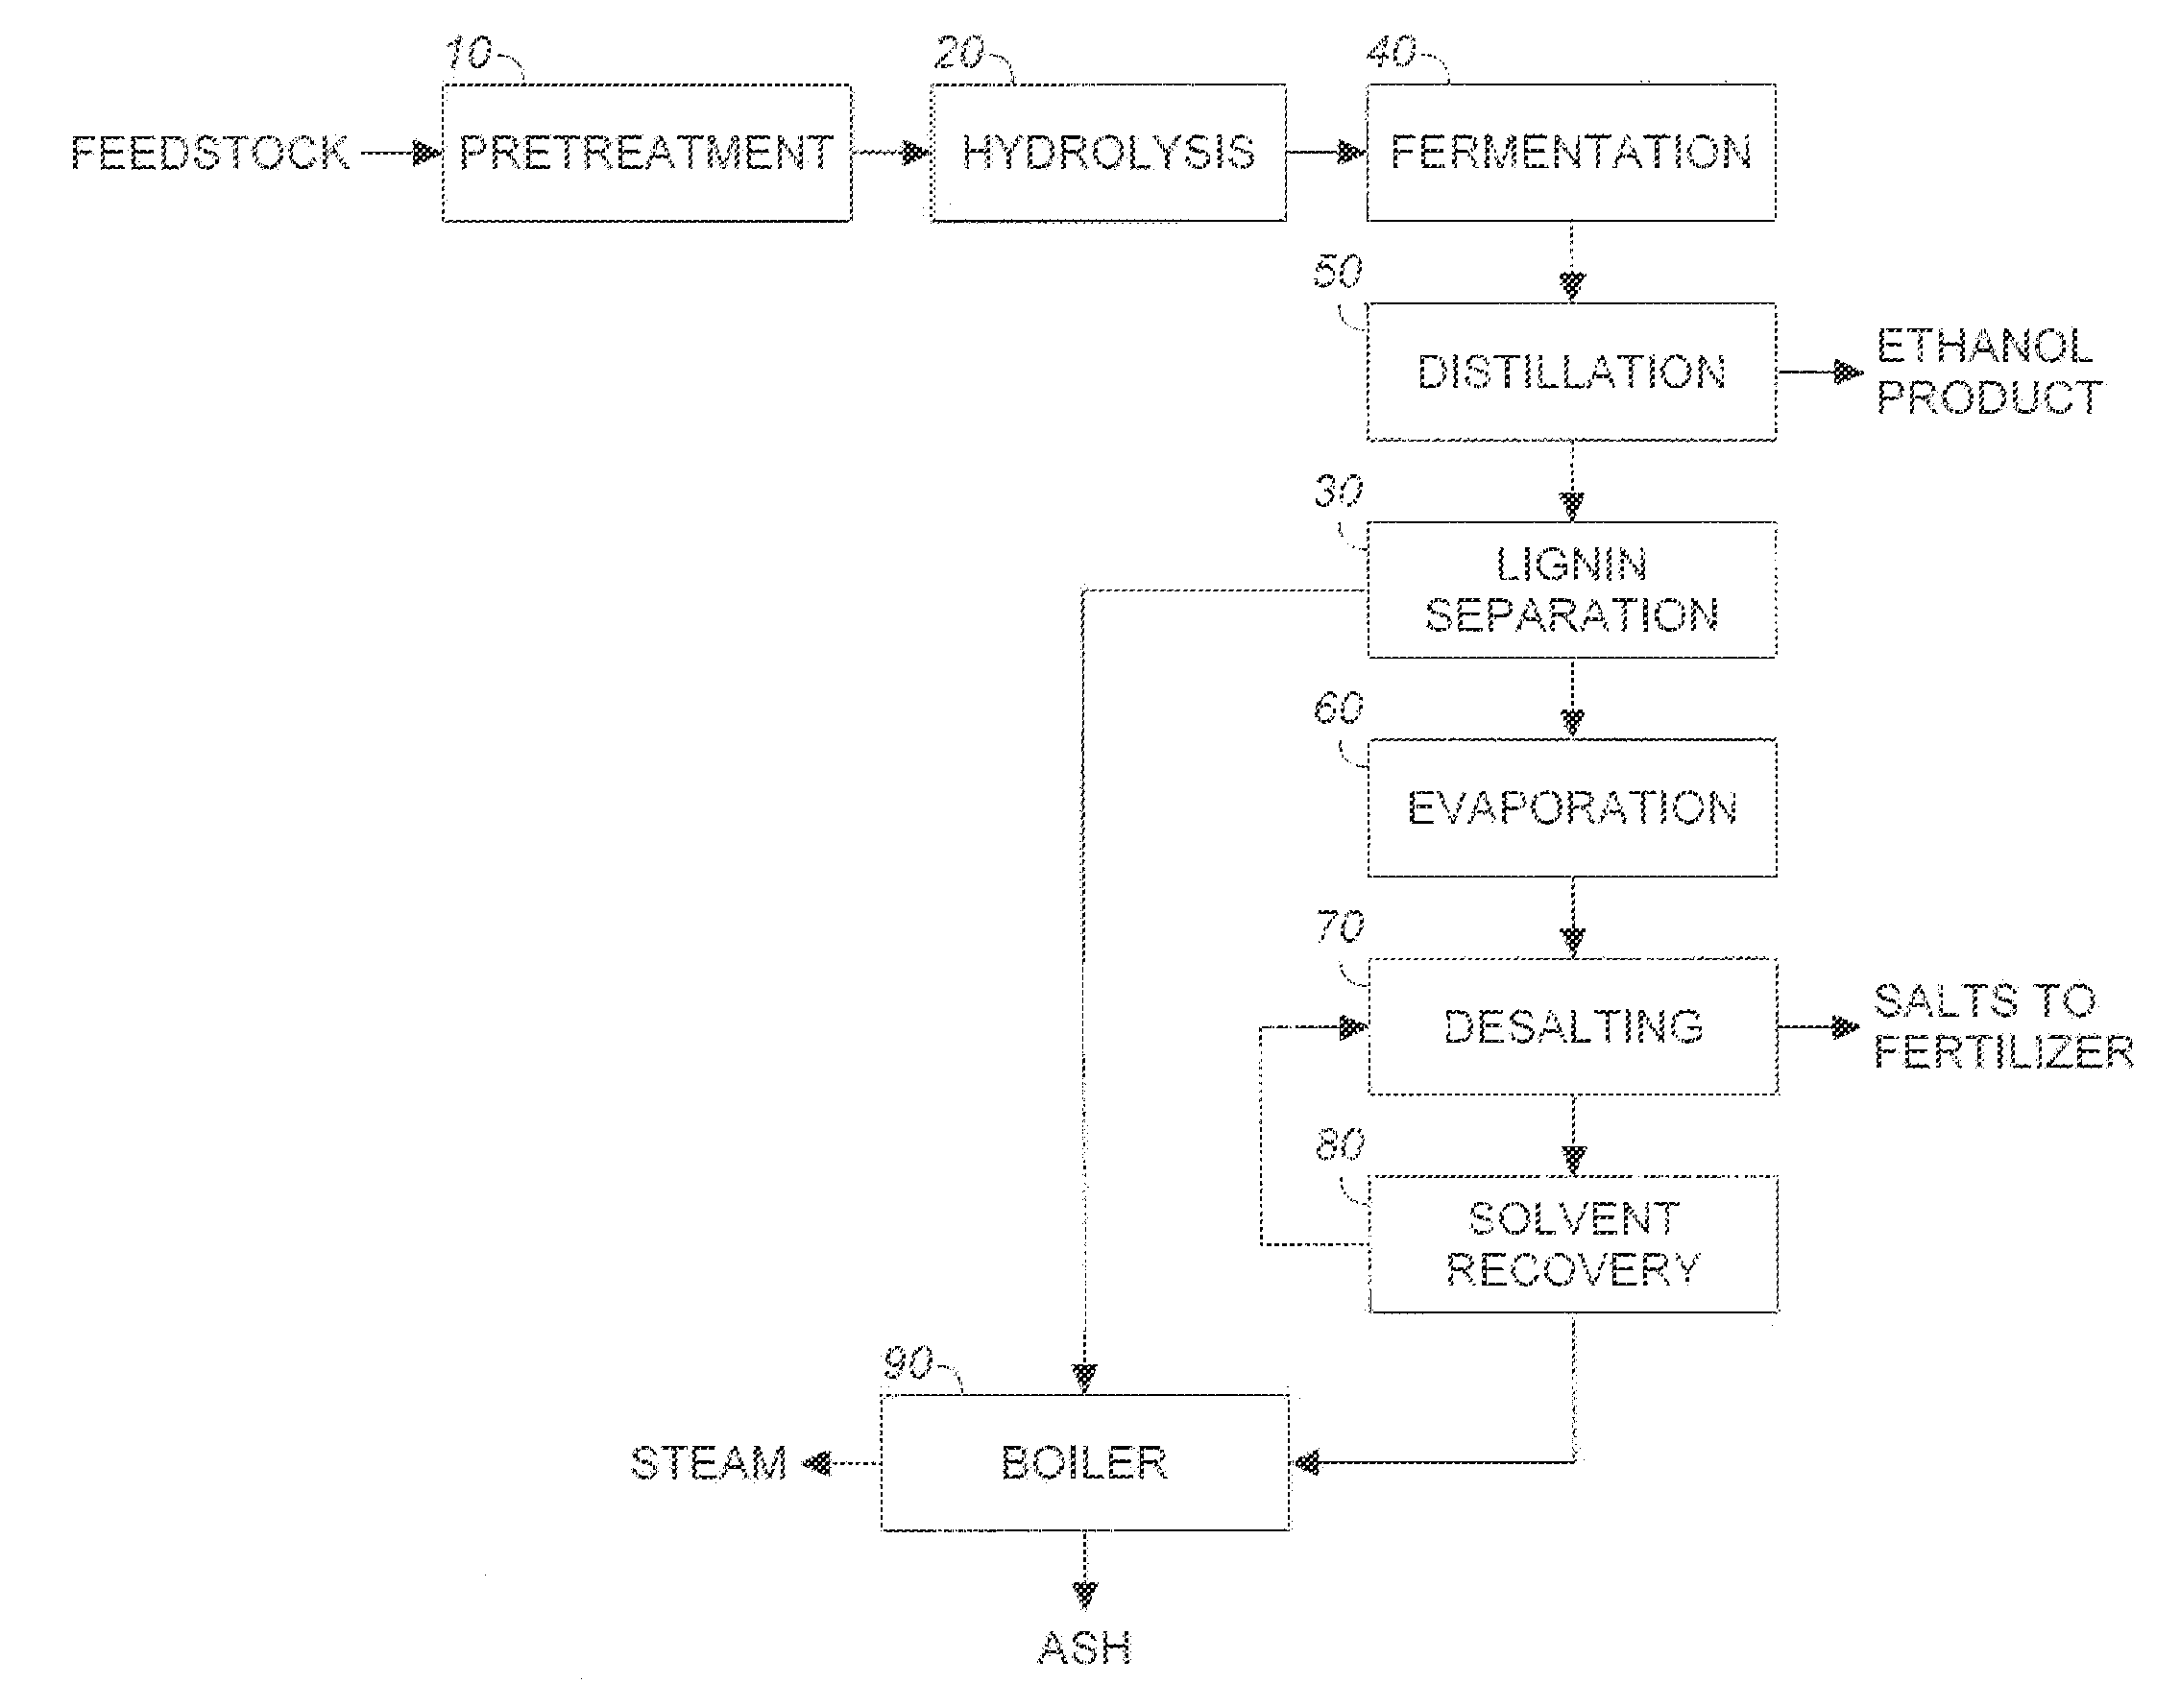 Process for recovering salt during a lignocellulosic conversion process